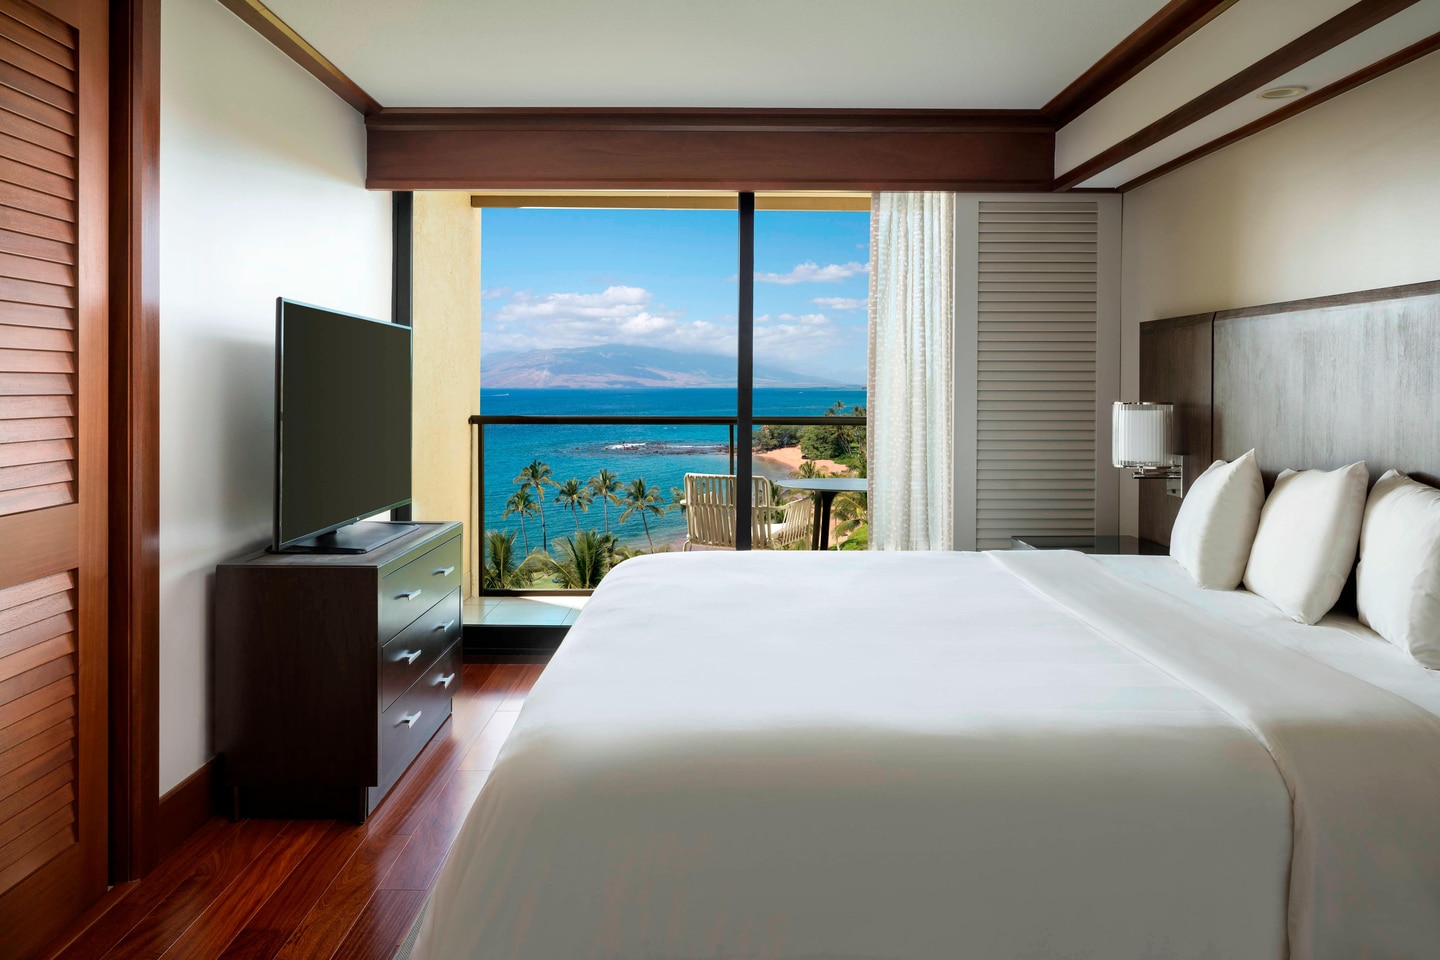 Best Marriott Bonvoy Category 6 and Category 7 Off-Peak Hotels & Resorts in Hawaii For Your Marriott Free Night Certificate